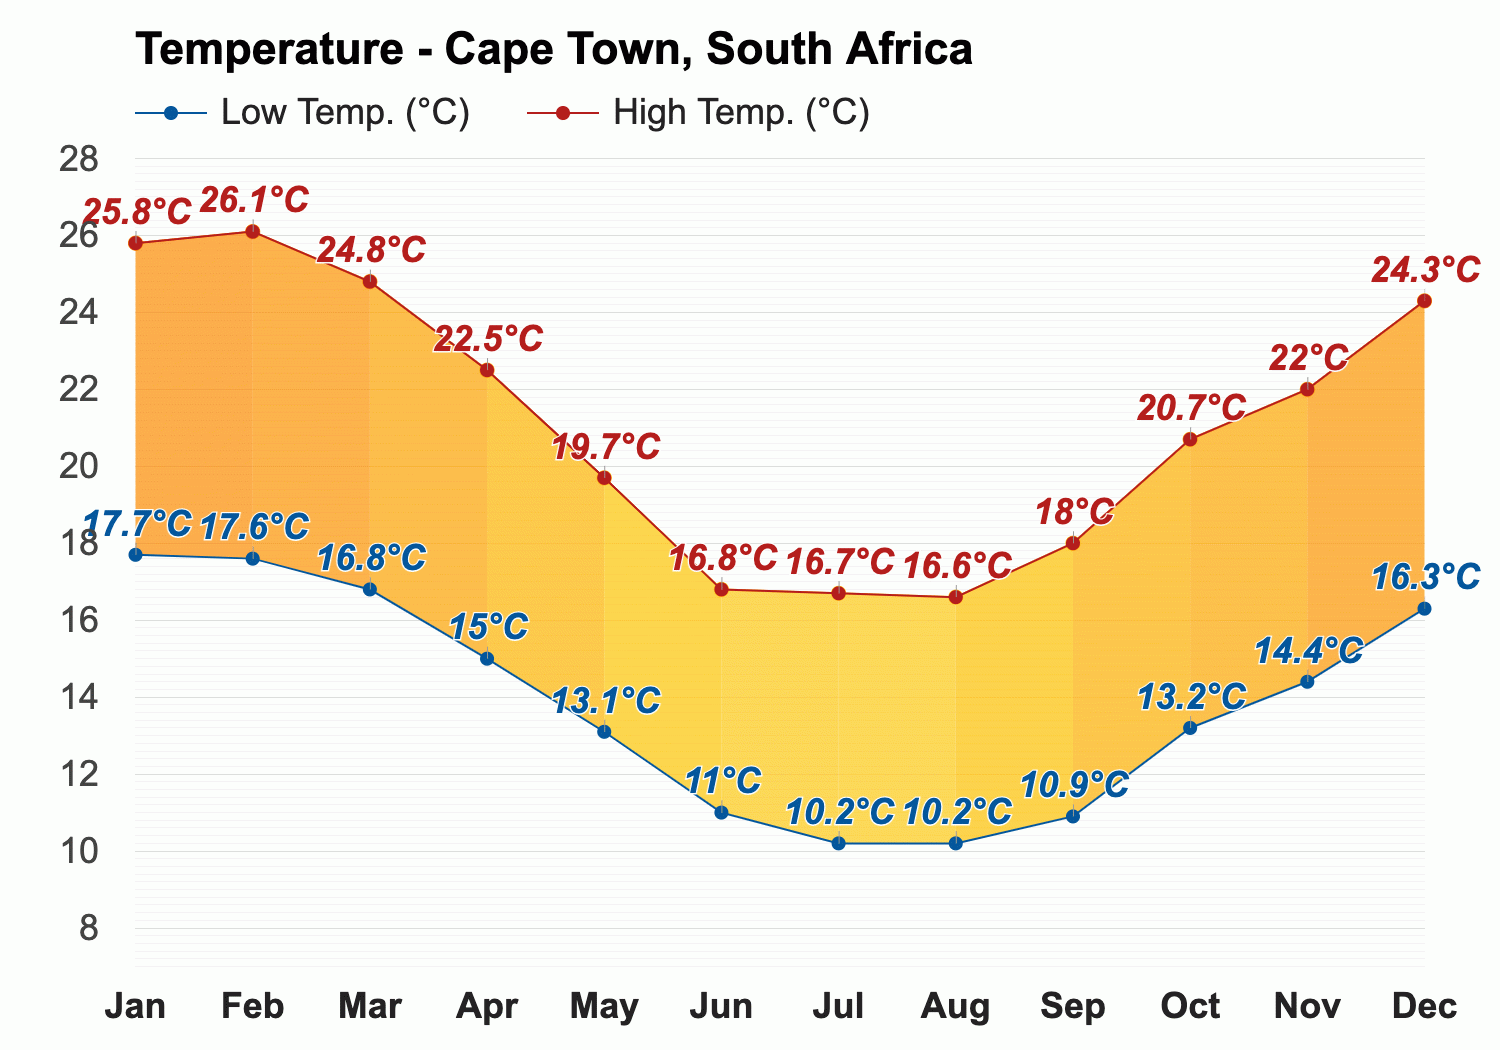 November Weather forecast - Spring forecast - Cape Town, South Africa